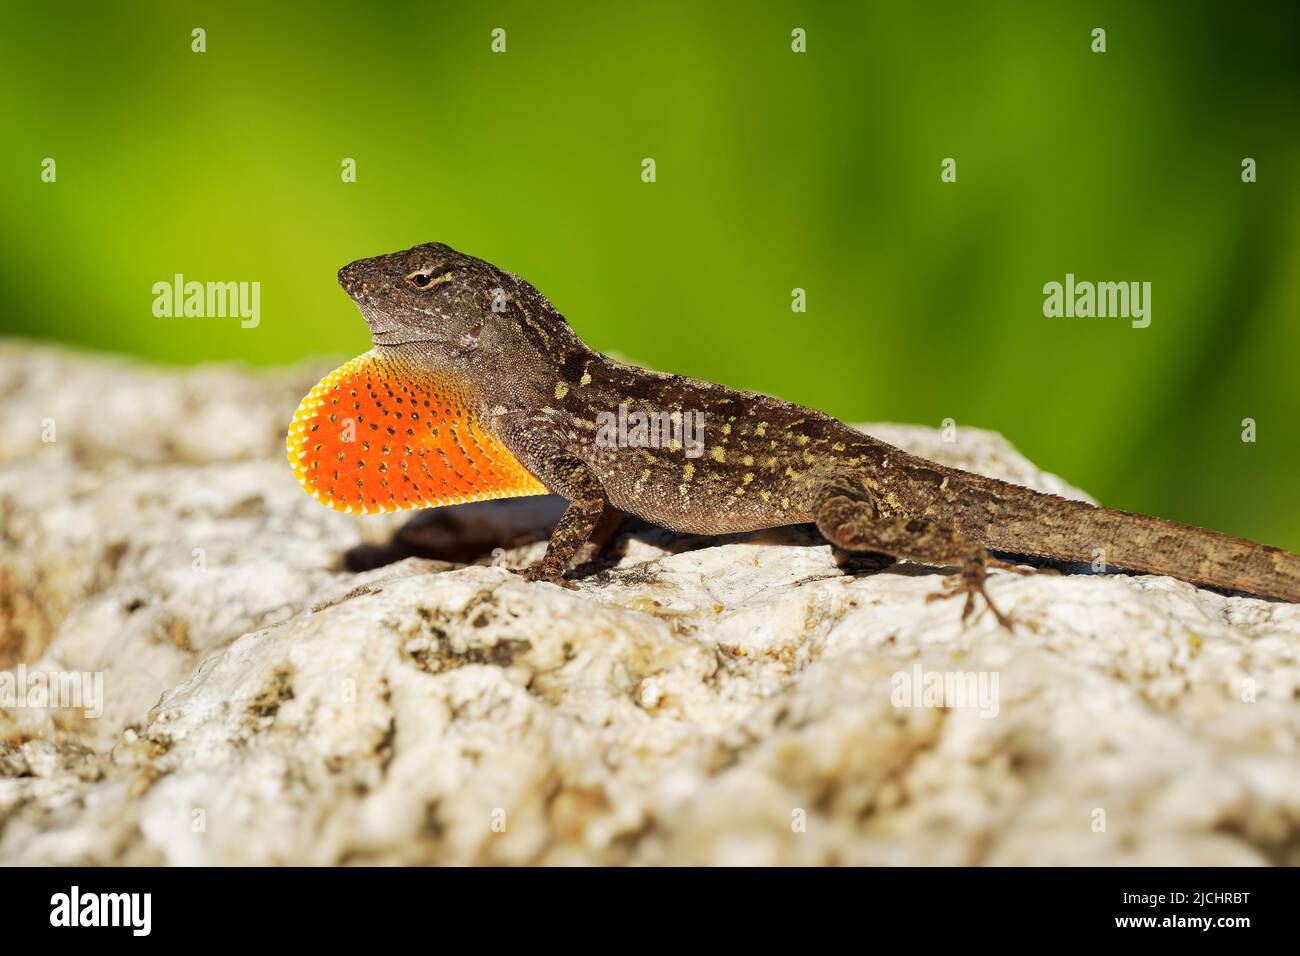 Brown Anole - Anolis sagrei also Cuban brown or De la Sagra anole, lizard in Dactyloidae, native to Cuba and Bahamas, widely introduced in Florida, Ha Stock Photo